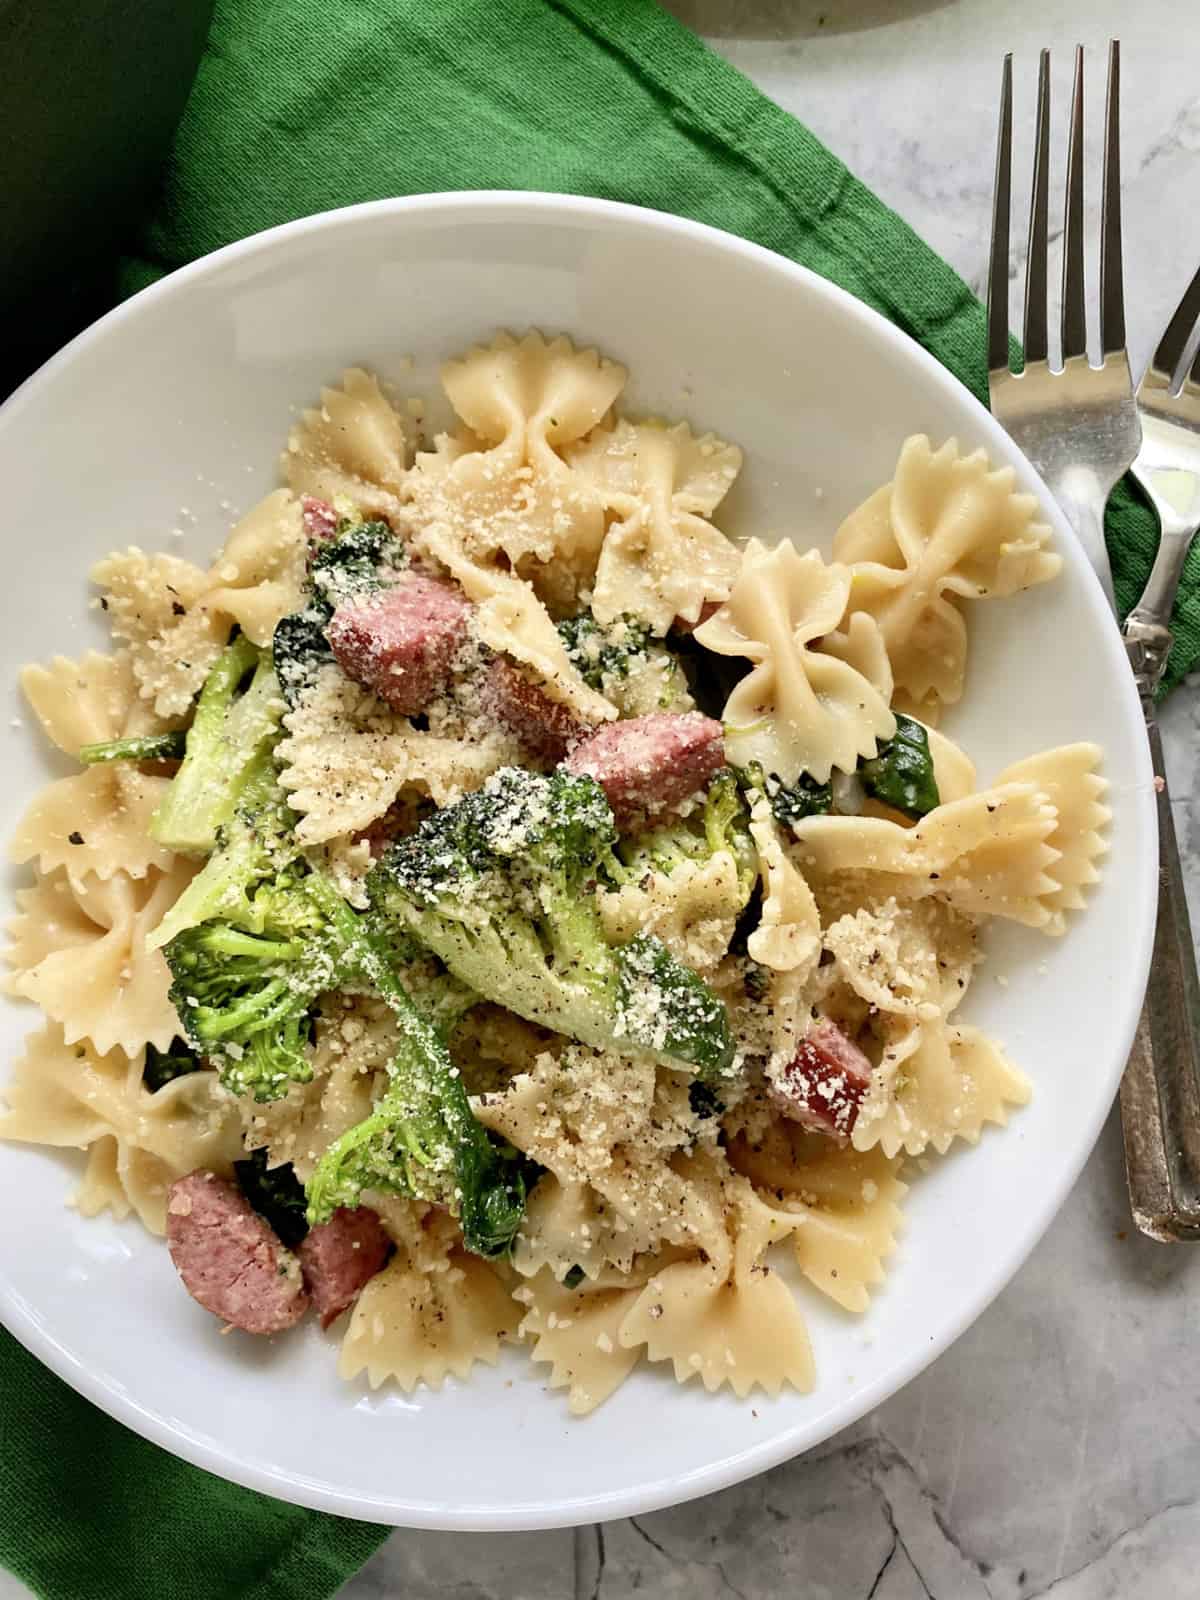 Top view of a white bowl filled with bow tie pasta, kielbasa, nad broccoli with forks on the side.